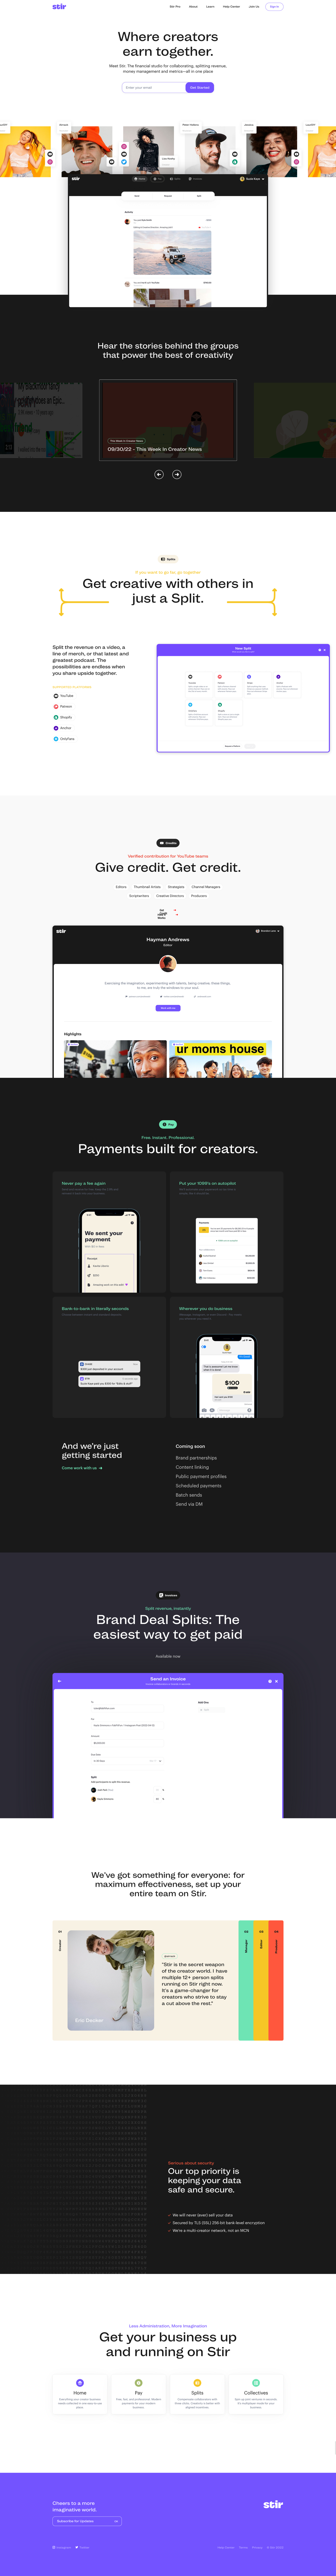 Stir Landing Page Example: Where creators ‍earn together. Meet Stir. The financial studio for collaborating, splitting revenue, money management and metrics—all in one place.